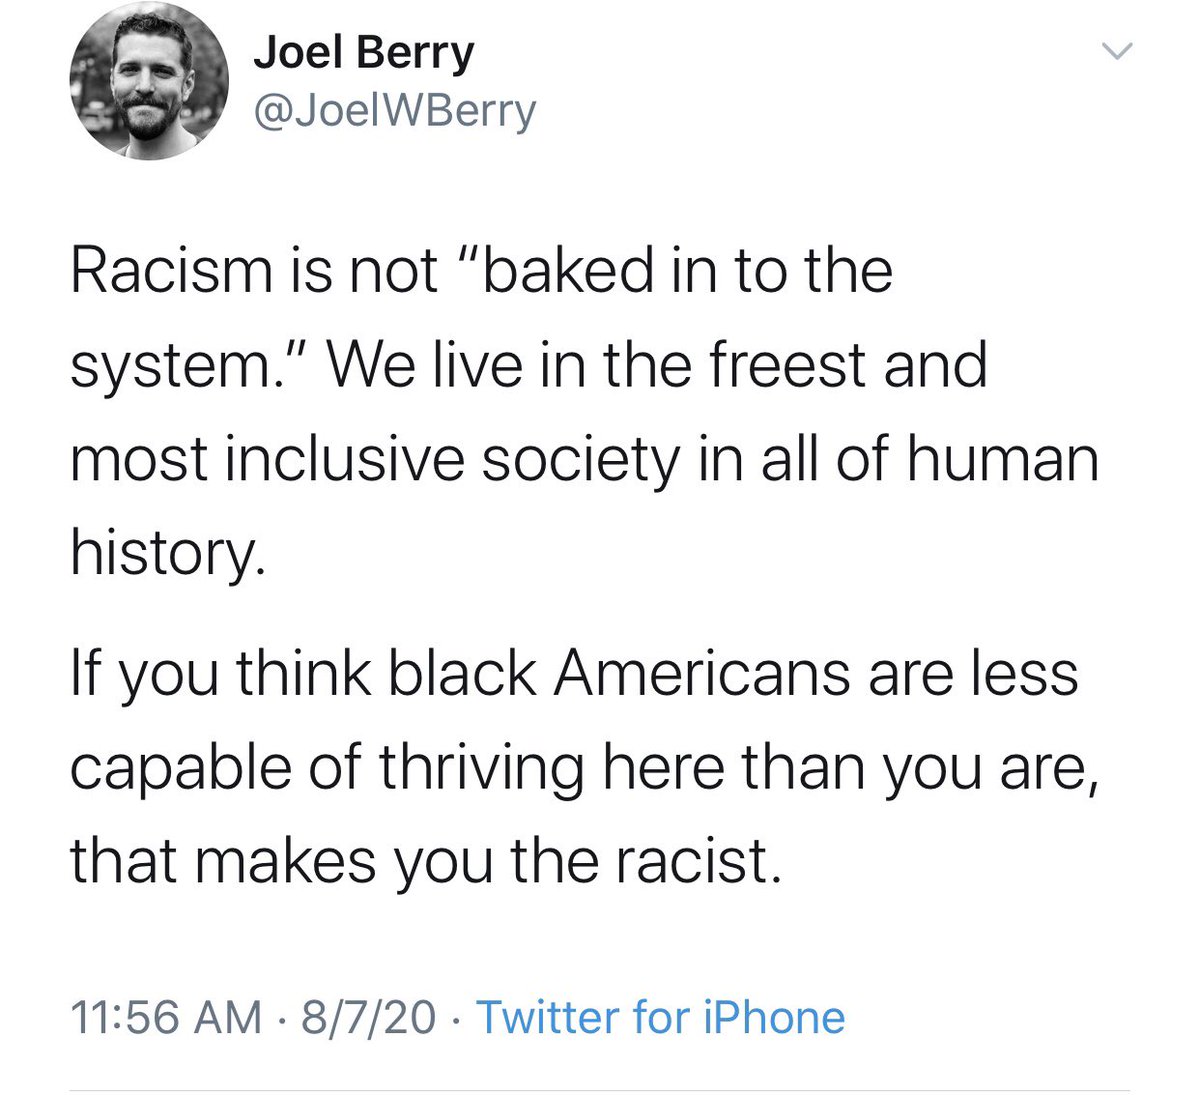 Joel Berry, the assistant editor for The Babylon Bee.